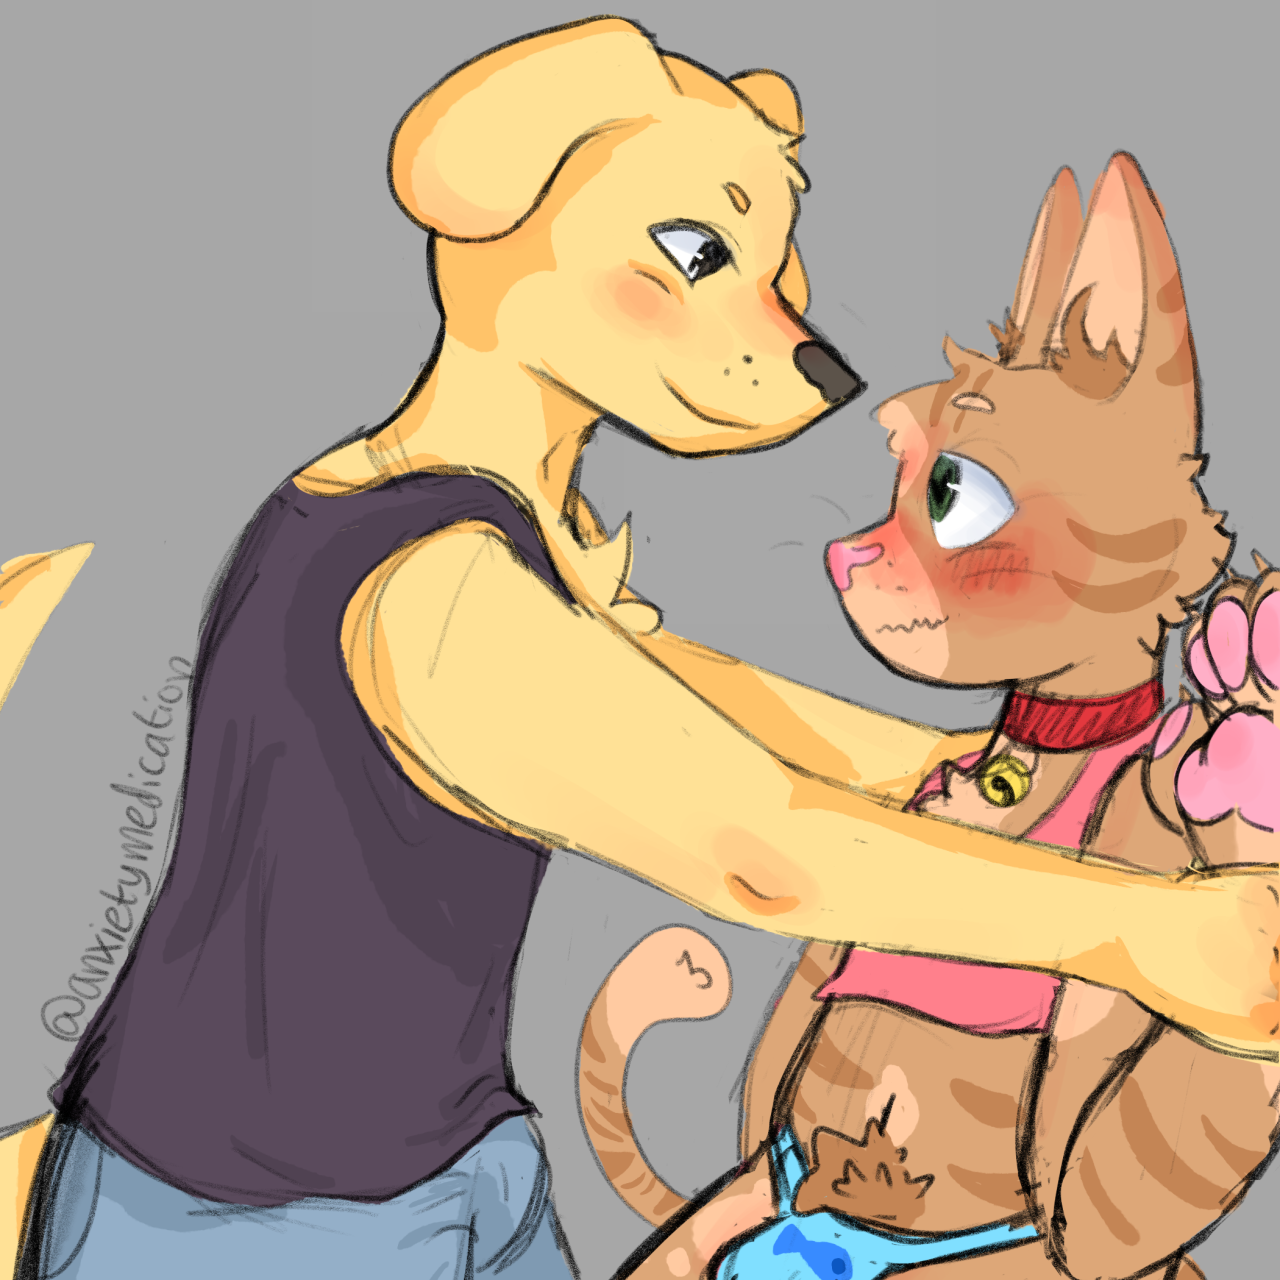 an anthro dog cornering an anthro cat in just a jockstrap. the cat is tabby, and quite flustered. the dog is a golden retriever and has lust in his eyes.